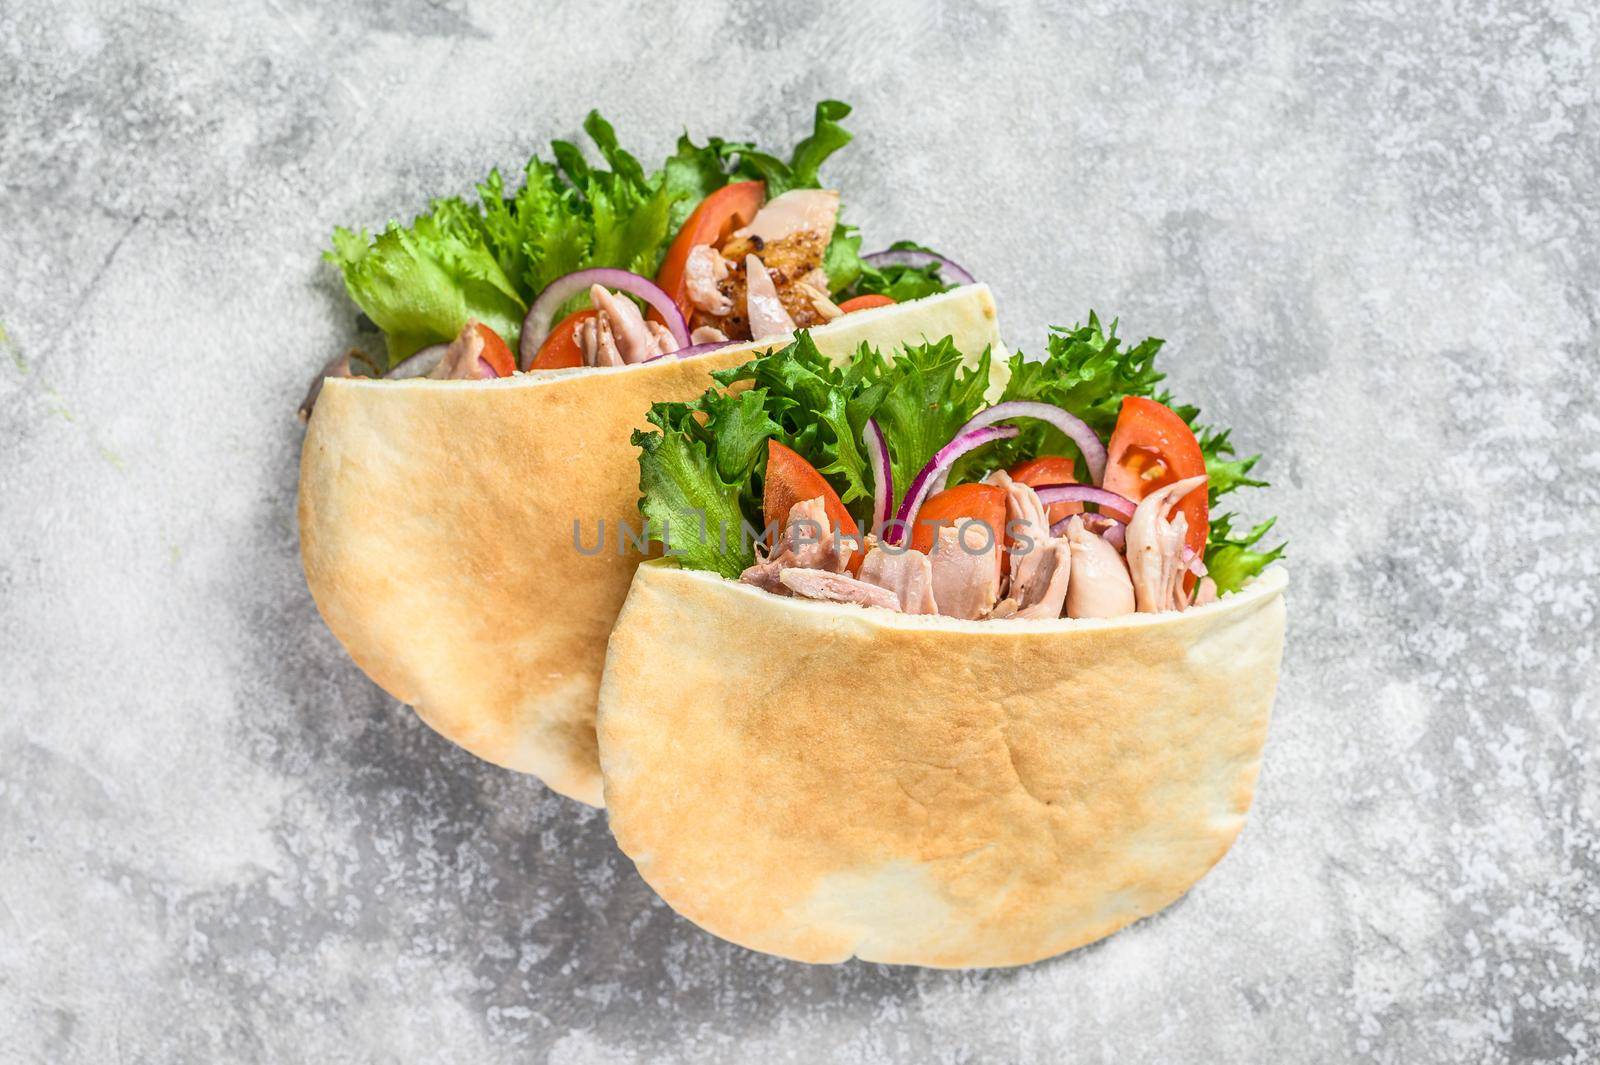 Doner kebab with grilled chicken meat and vegetables in pita bread. Gray background. Top view by Composter